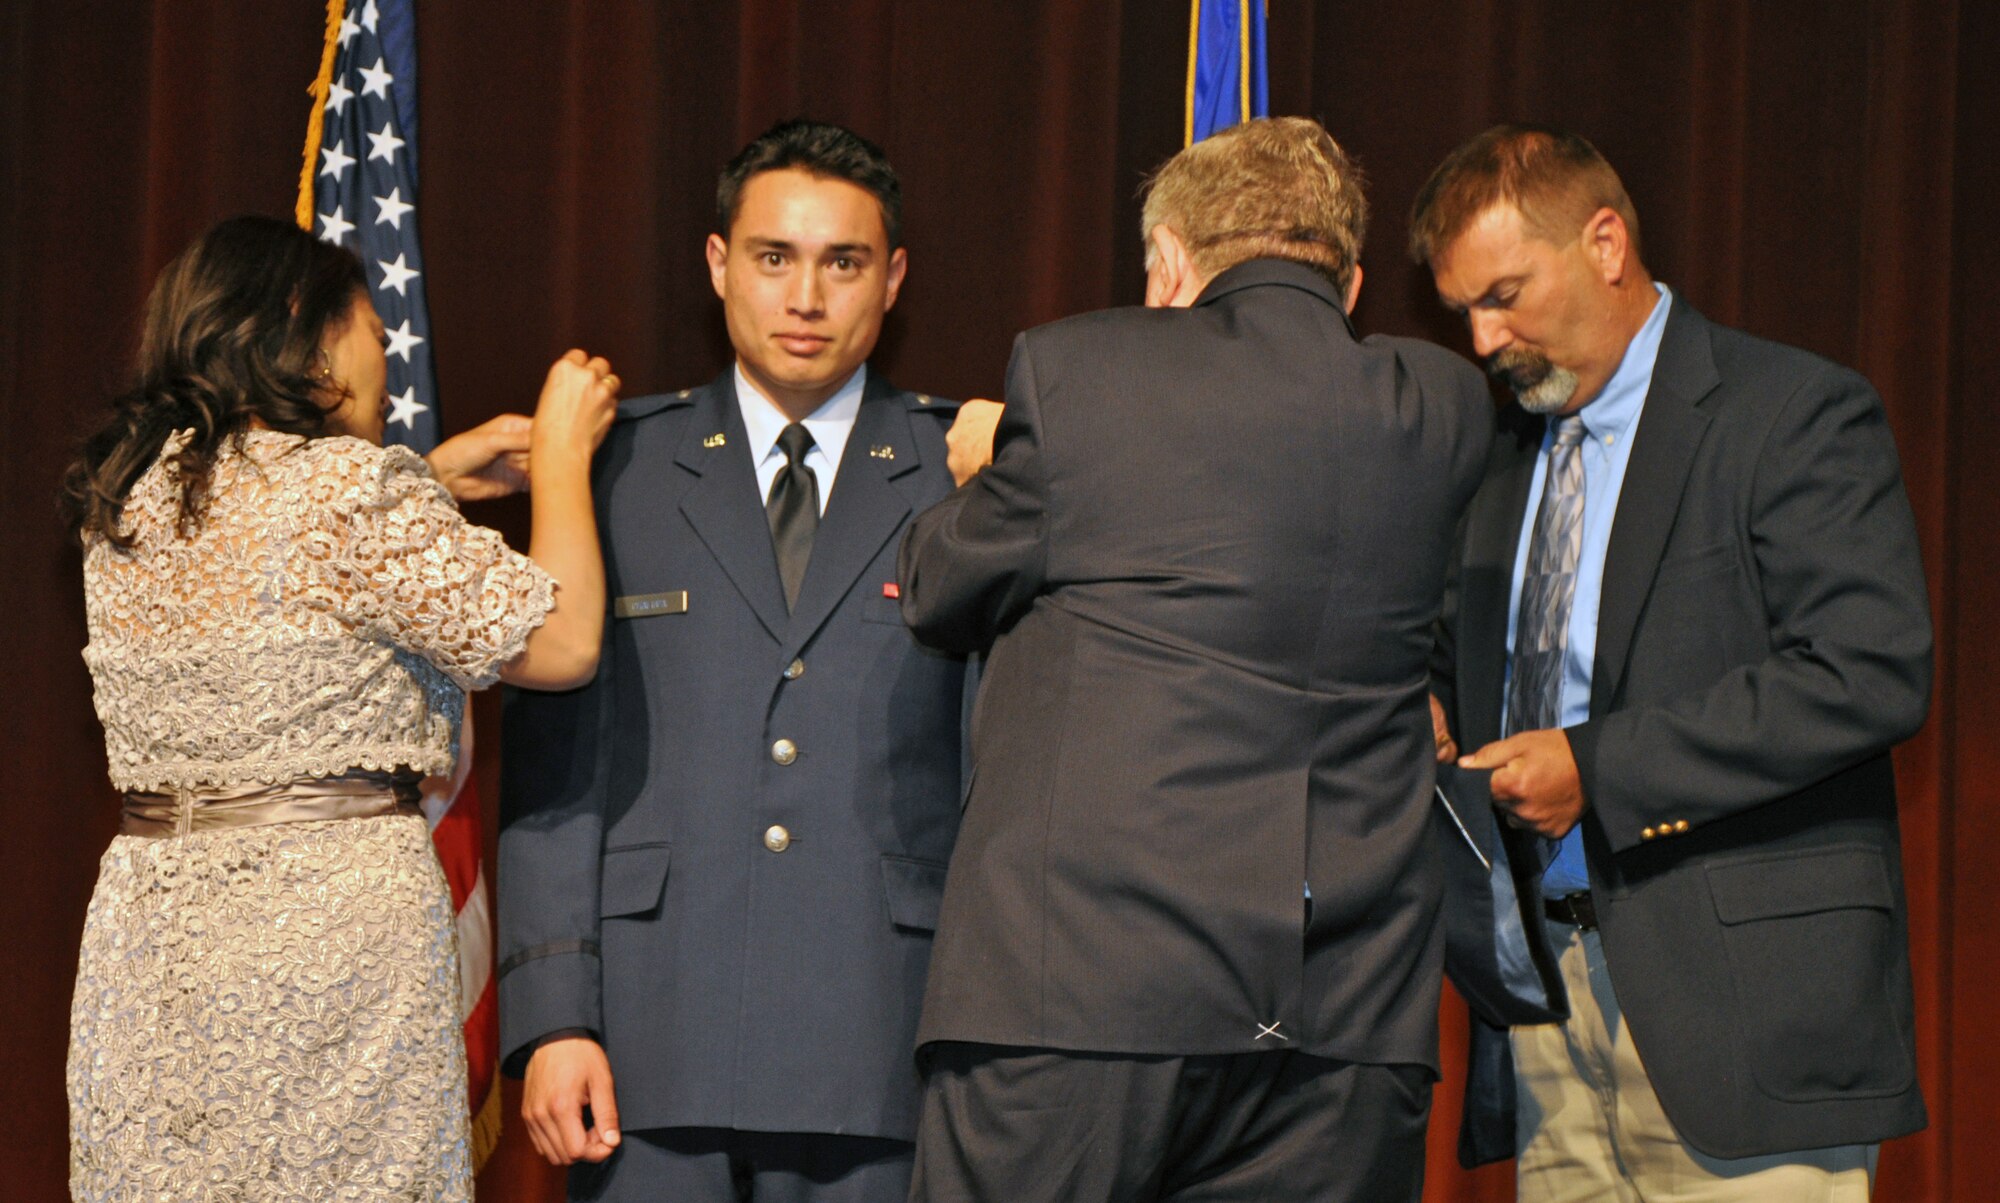 SAN ANGELO, Texas - 2nd Lt. Kenneth Chalupa, former Angelo State University Air Force ROTC Detachment 847 cadet, receives his second lieutenant bars during a ROTC commissioning ceremony at ASU Houston Harte University Center here, May 10. Chalupa chose to have his mother, stepfather and grandfather pin on his rank. (U.S. Air Force photo/ Airman 1st Class Joshua Edwards)